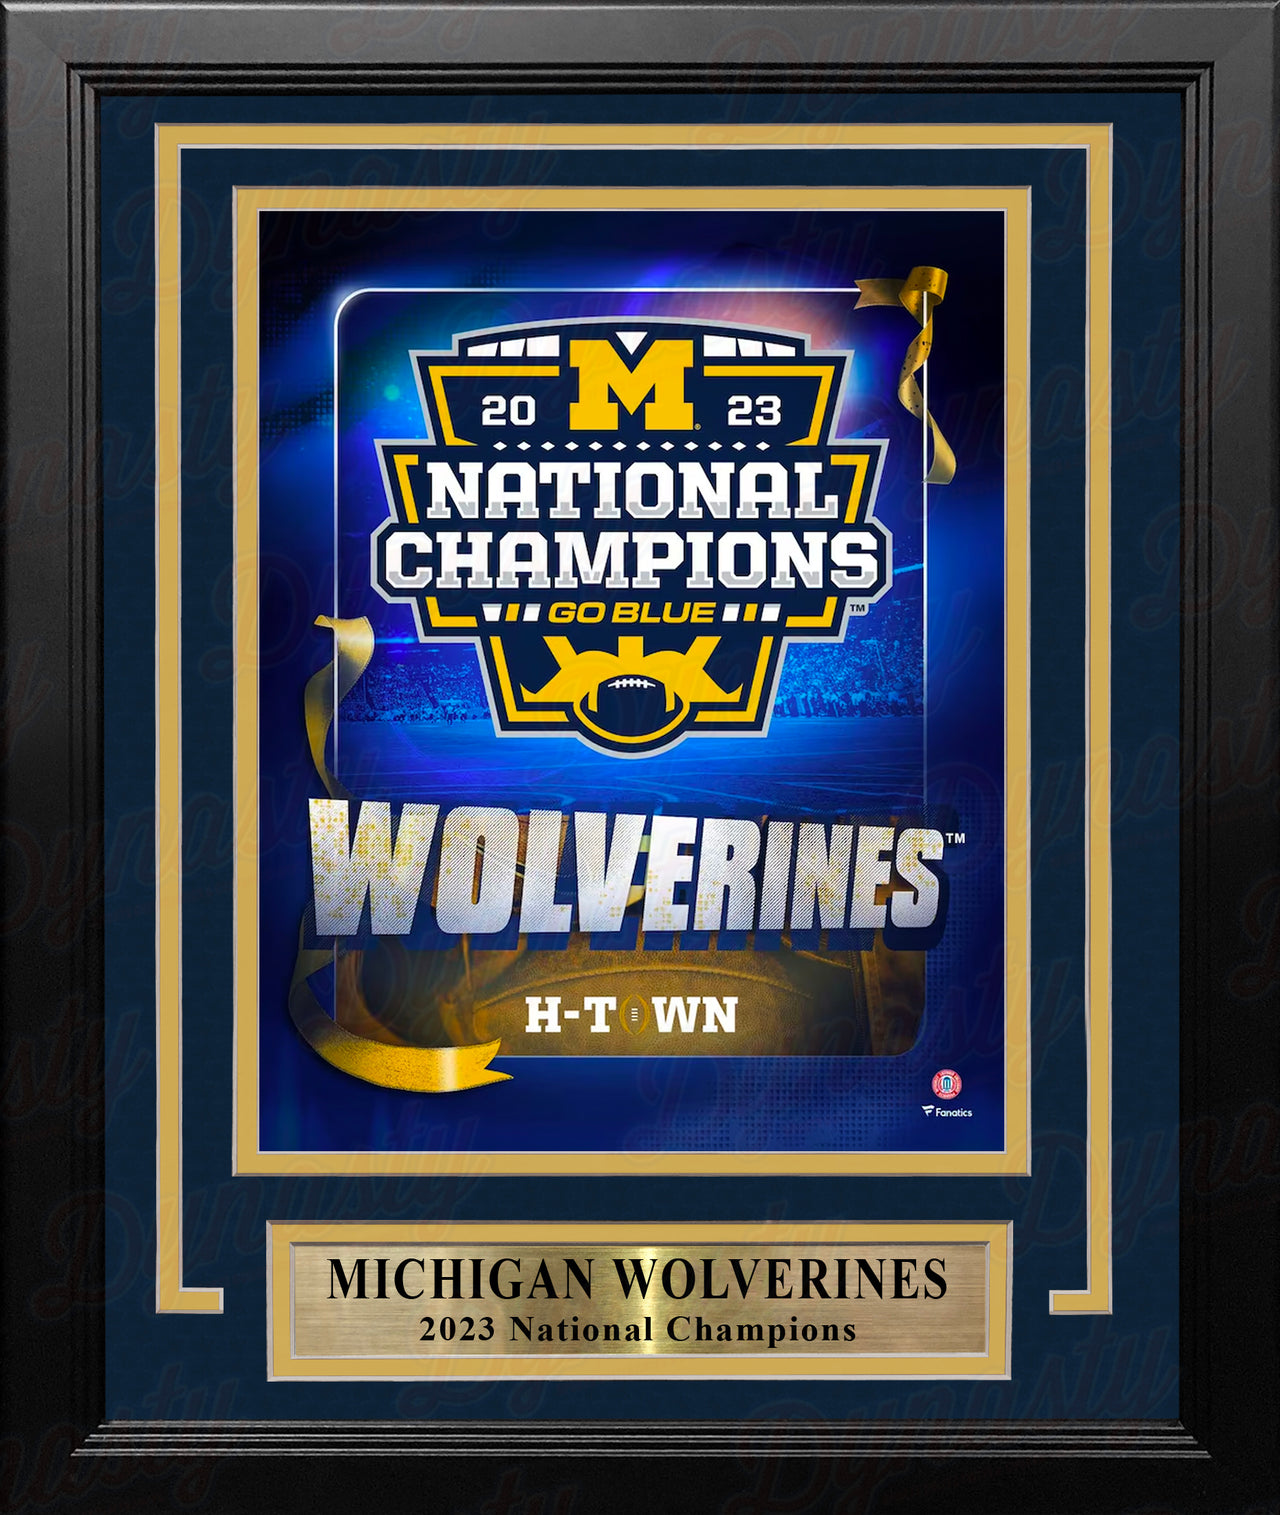 Michigan Wolverines 2023 National Champions 8" x 10" Framed College Football Collage Photo